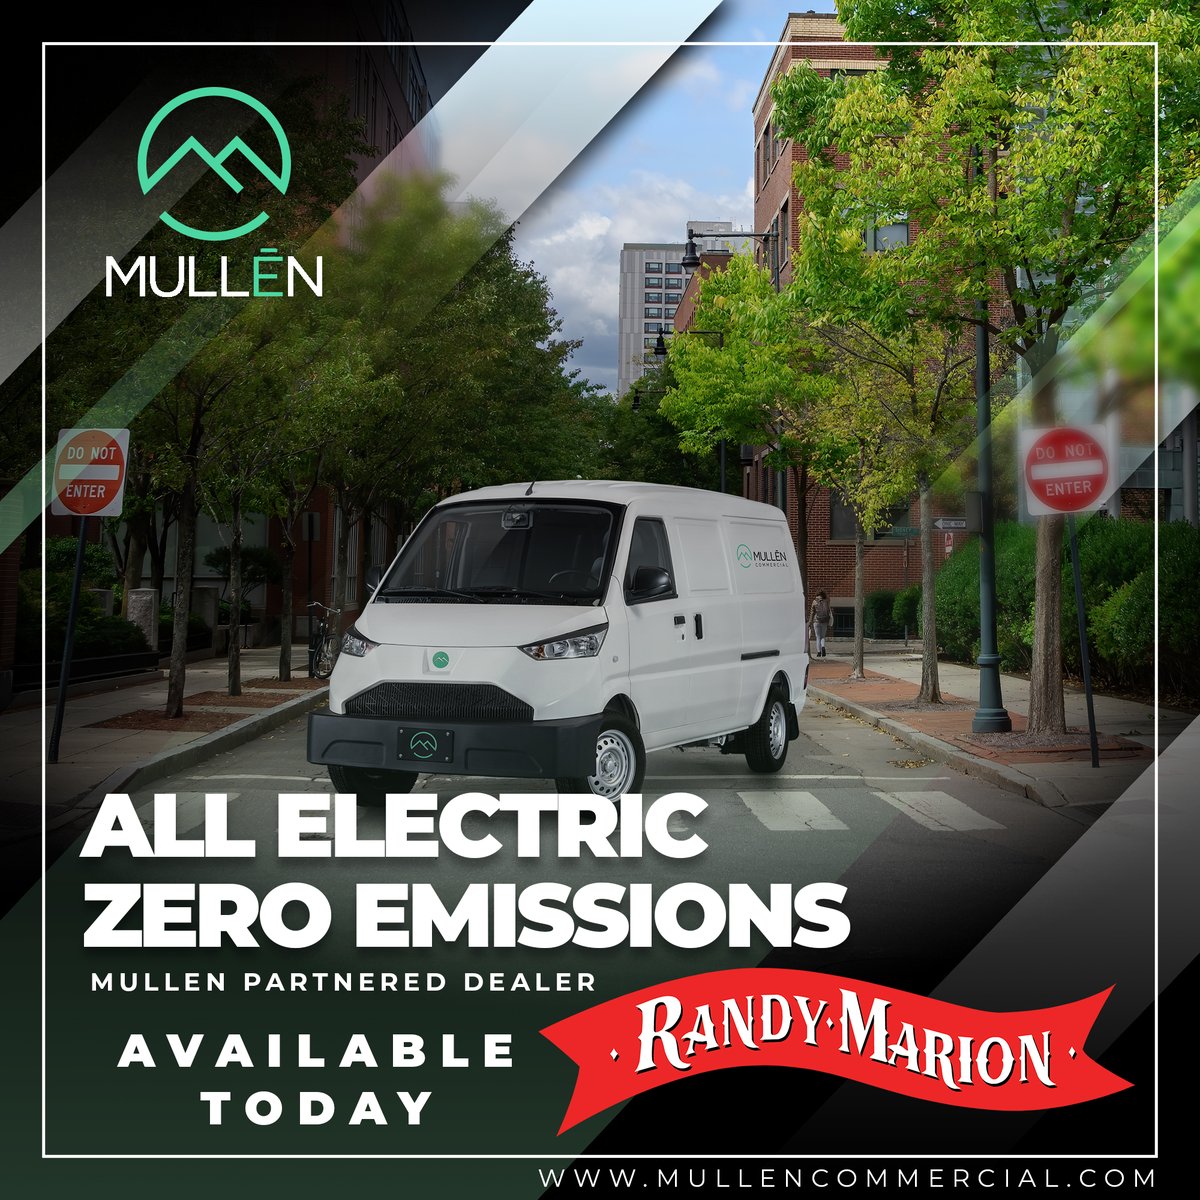 Built for your business, built for the future🚐⚡ The #AllElectric #MullenONE cargo van, now available at our dealer partner Randy Marion, delivers low total cost of ownership while reducing your carbon footprint. Check out the available inventory now: hubs.ly/Q02rVqxw0